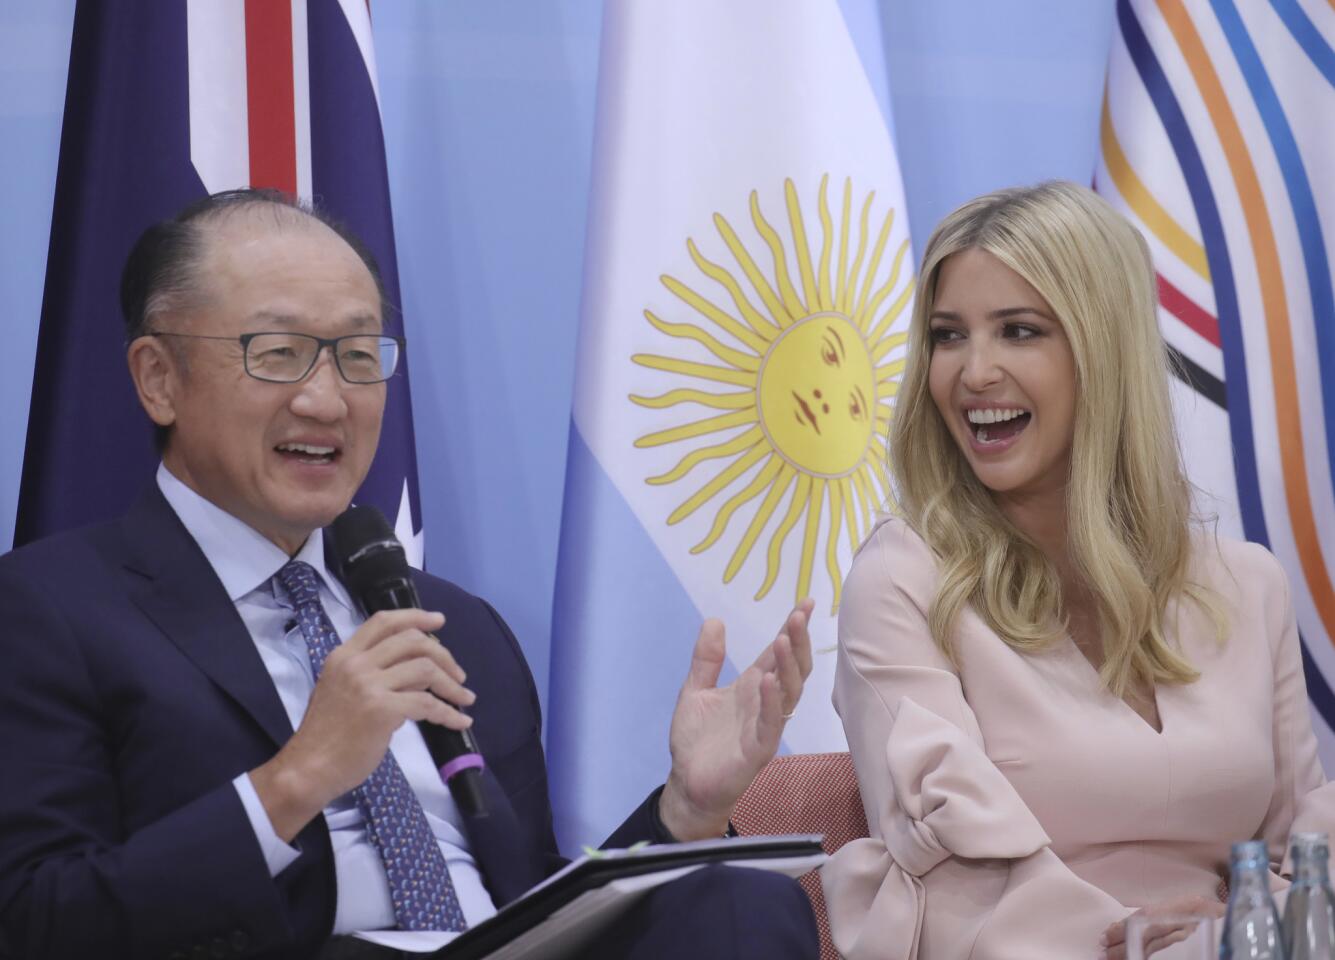 World Bank president Jim Yong Kim and Ivanka Trump, daughter of U.S. President Donald Trump attend the Women's Entrepreneur Finance Initiative launch event held in conjunction with the G-20 summit in Hamburg, Germany, on July 8, 2017.